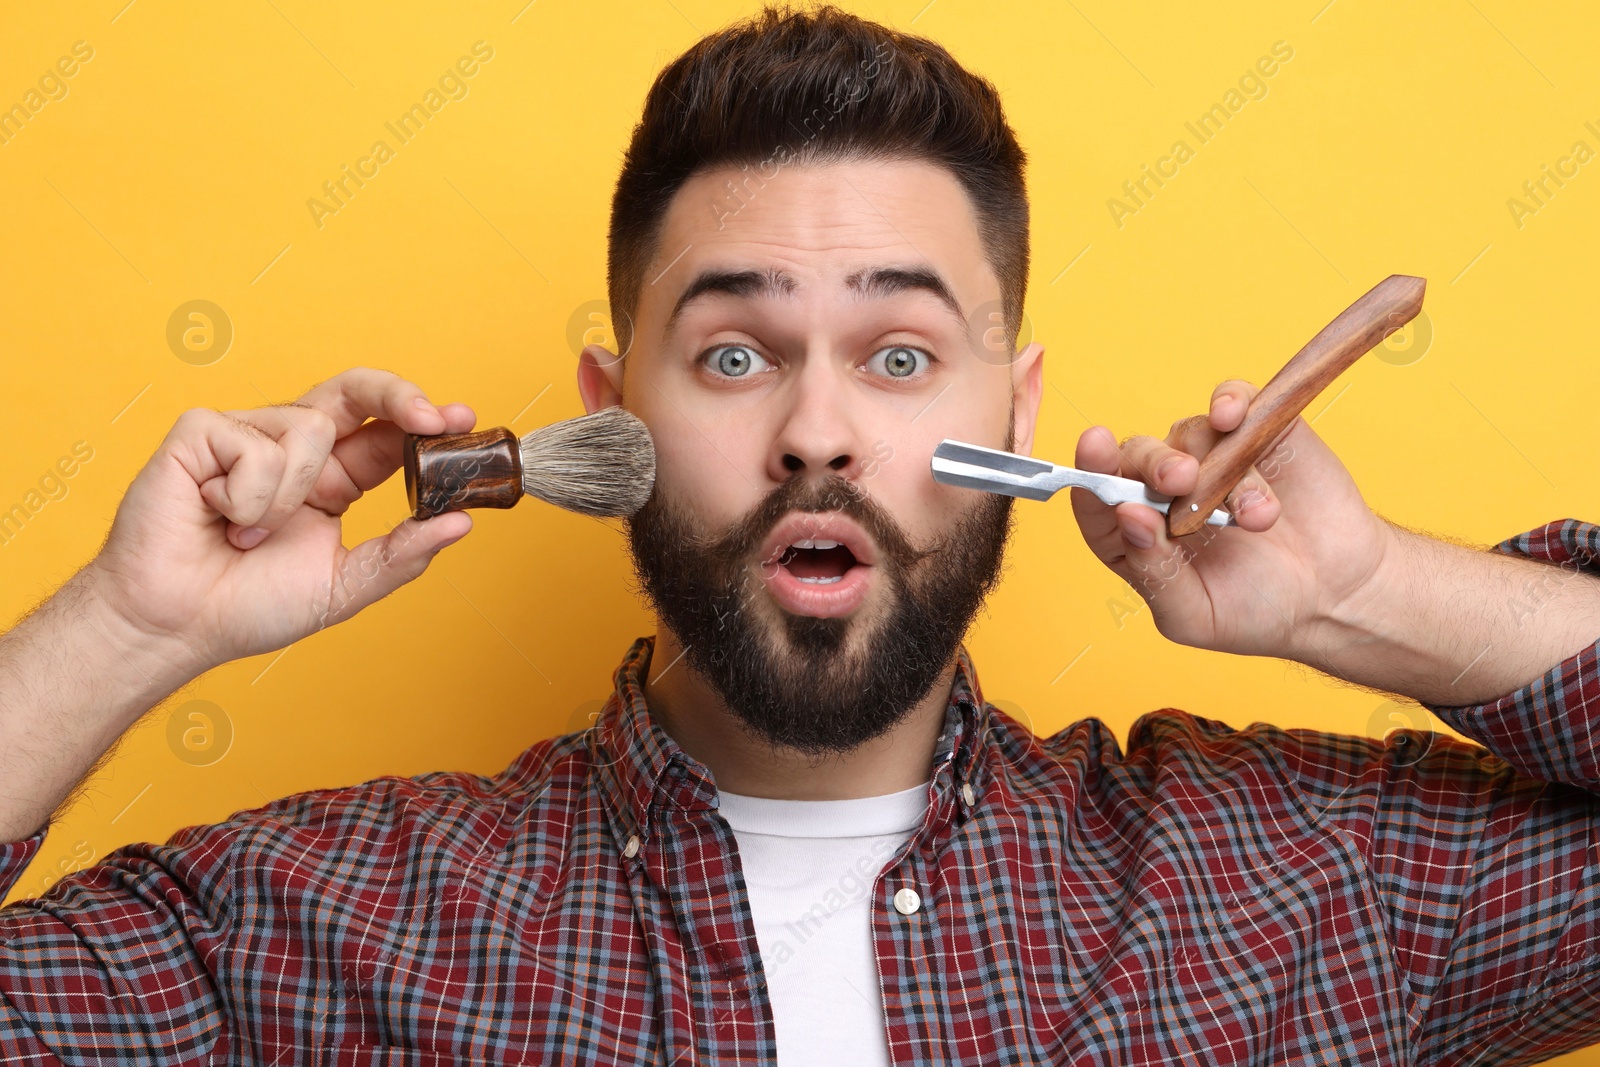 Photo of Handsome young man with mustache holding blade and shaving brush on yellow background